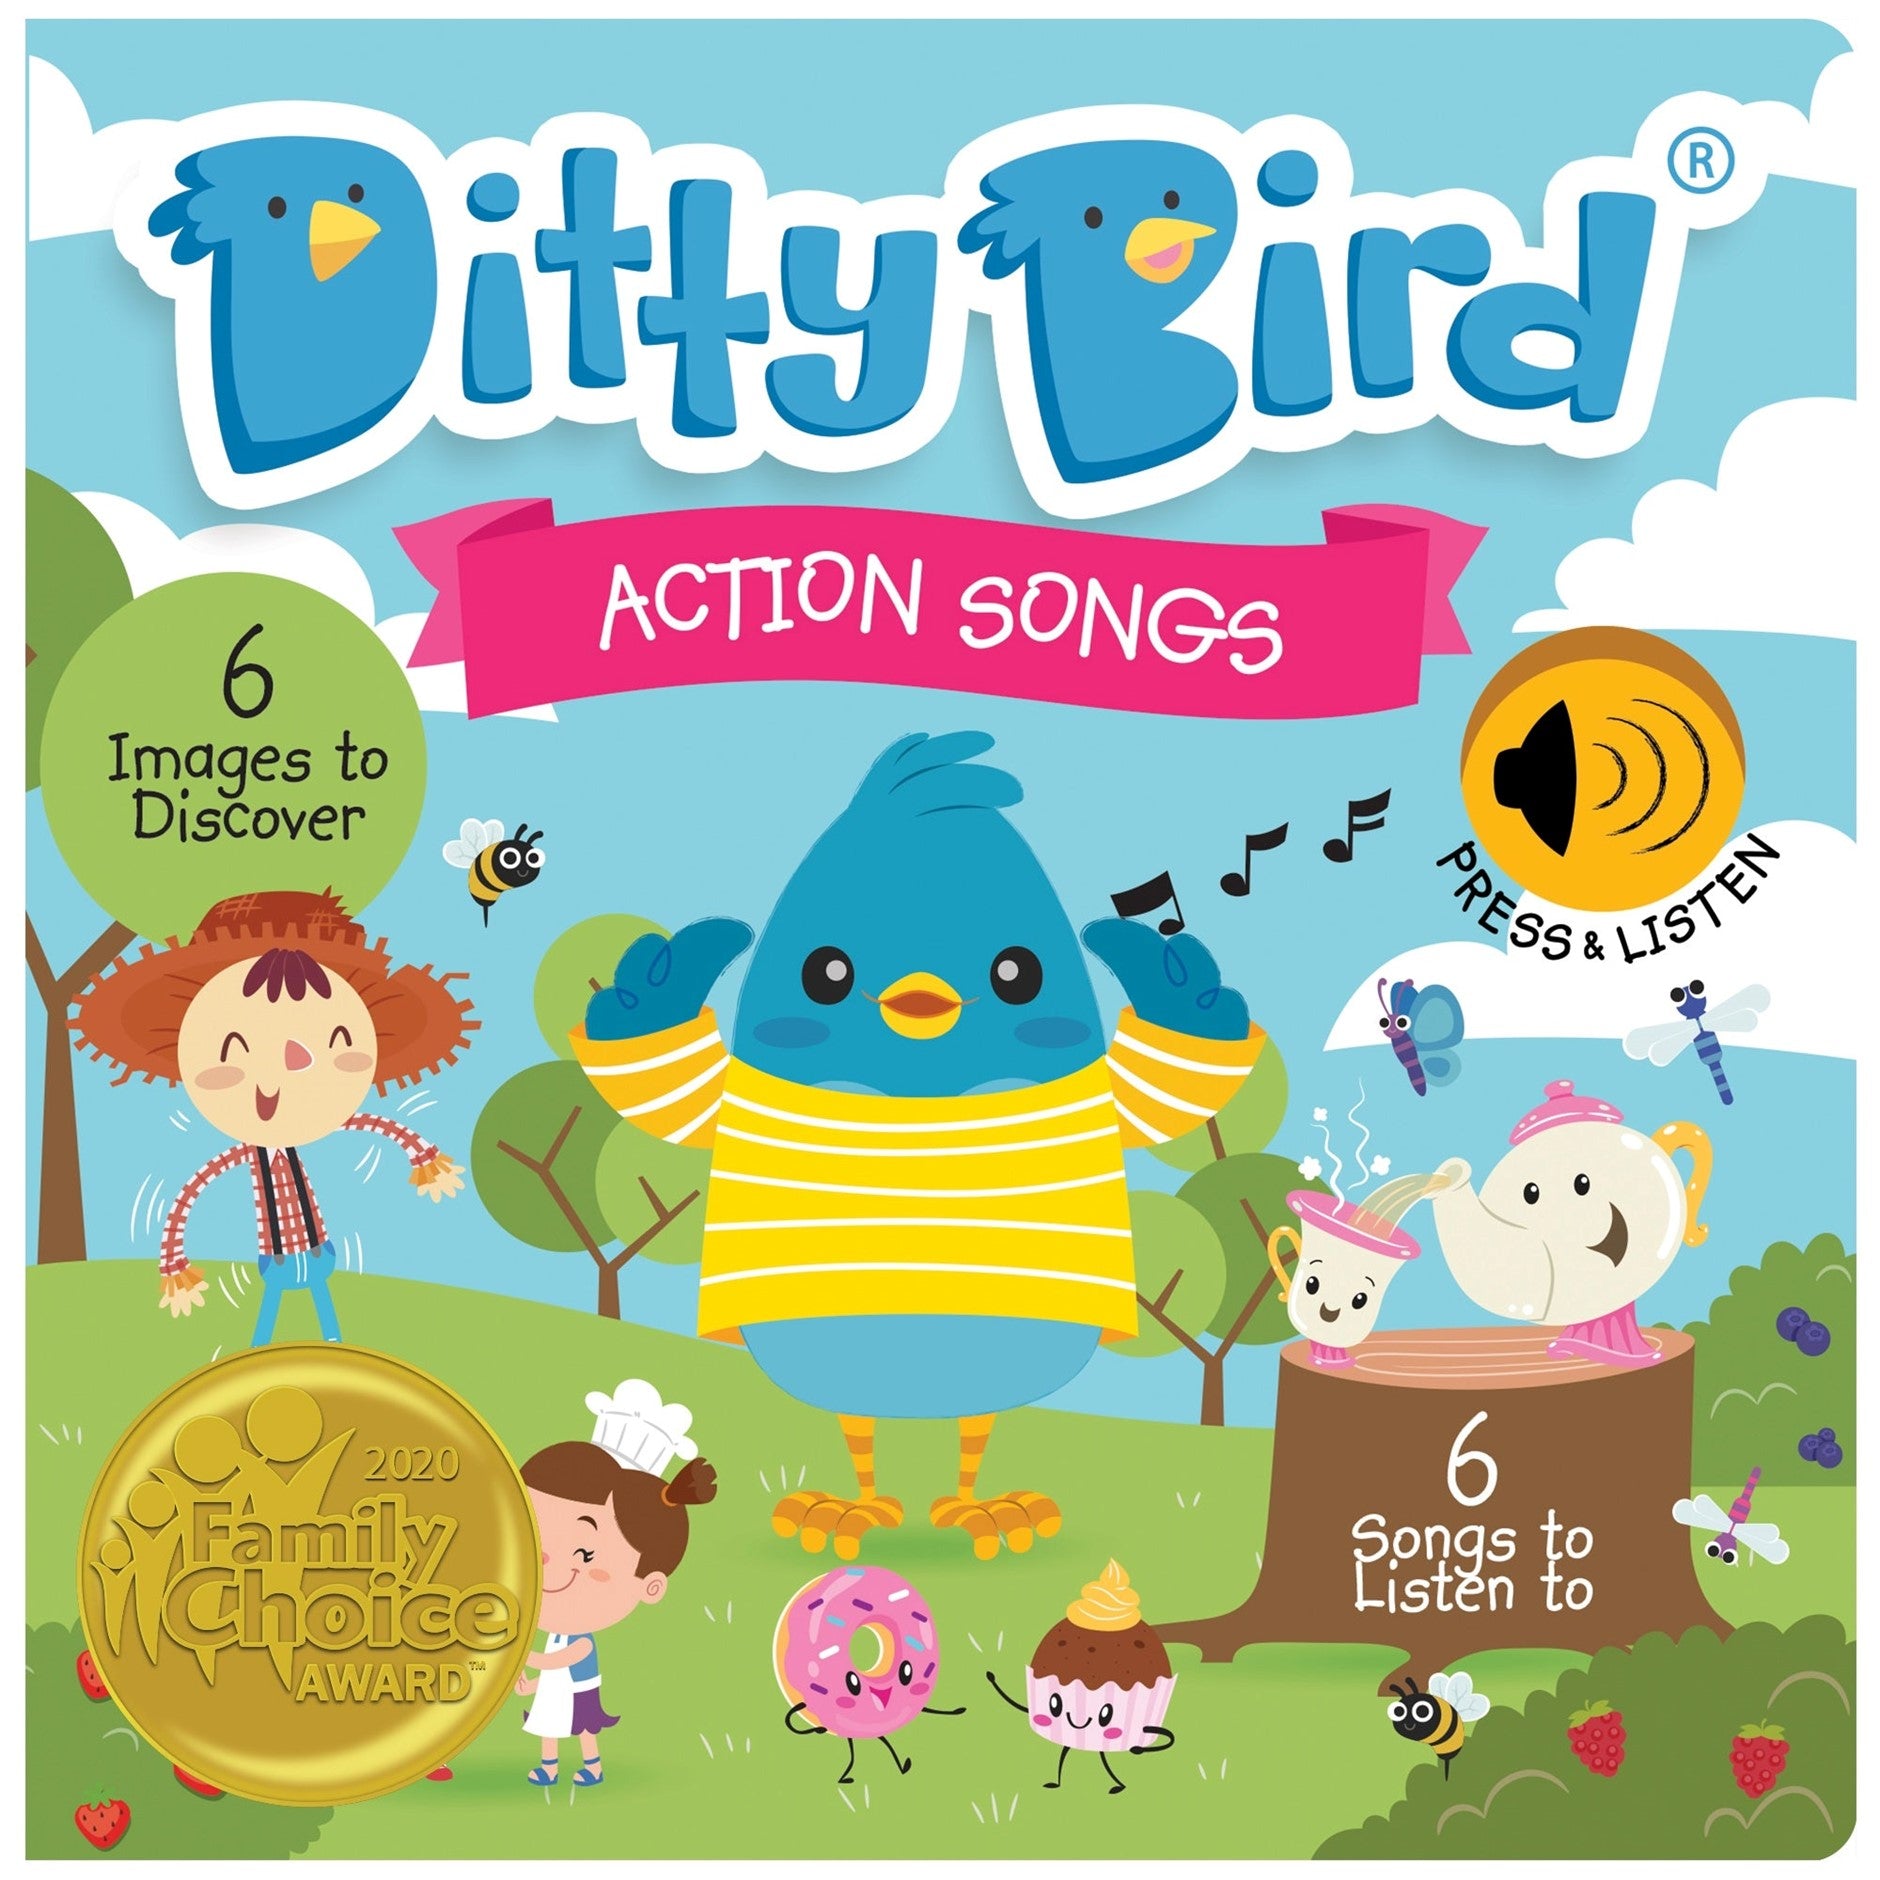 Action Songs Book